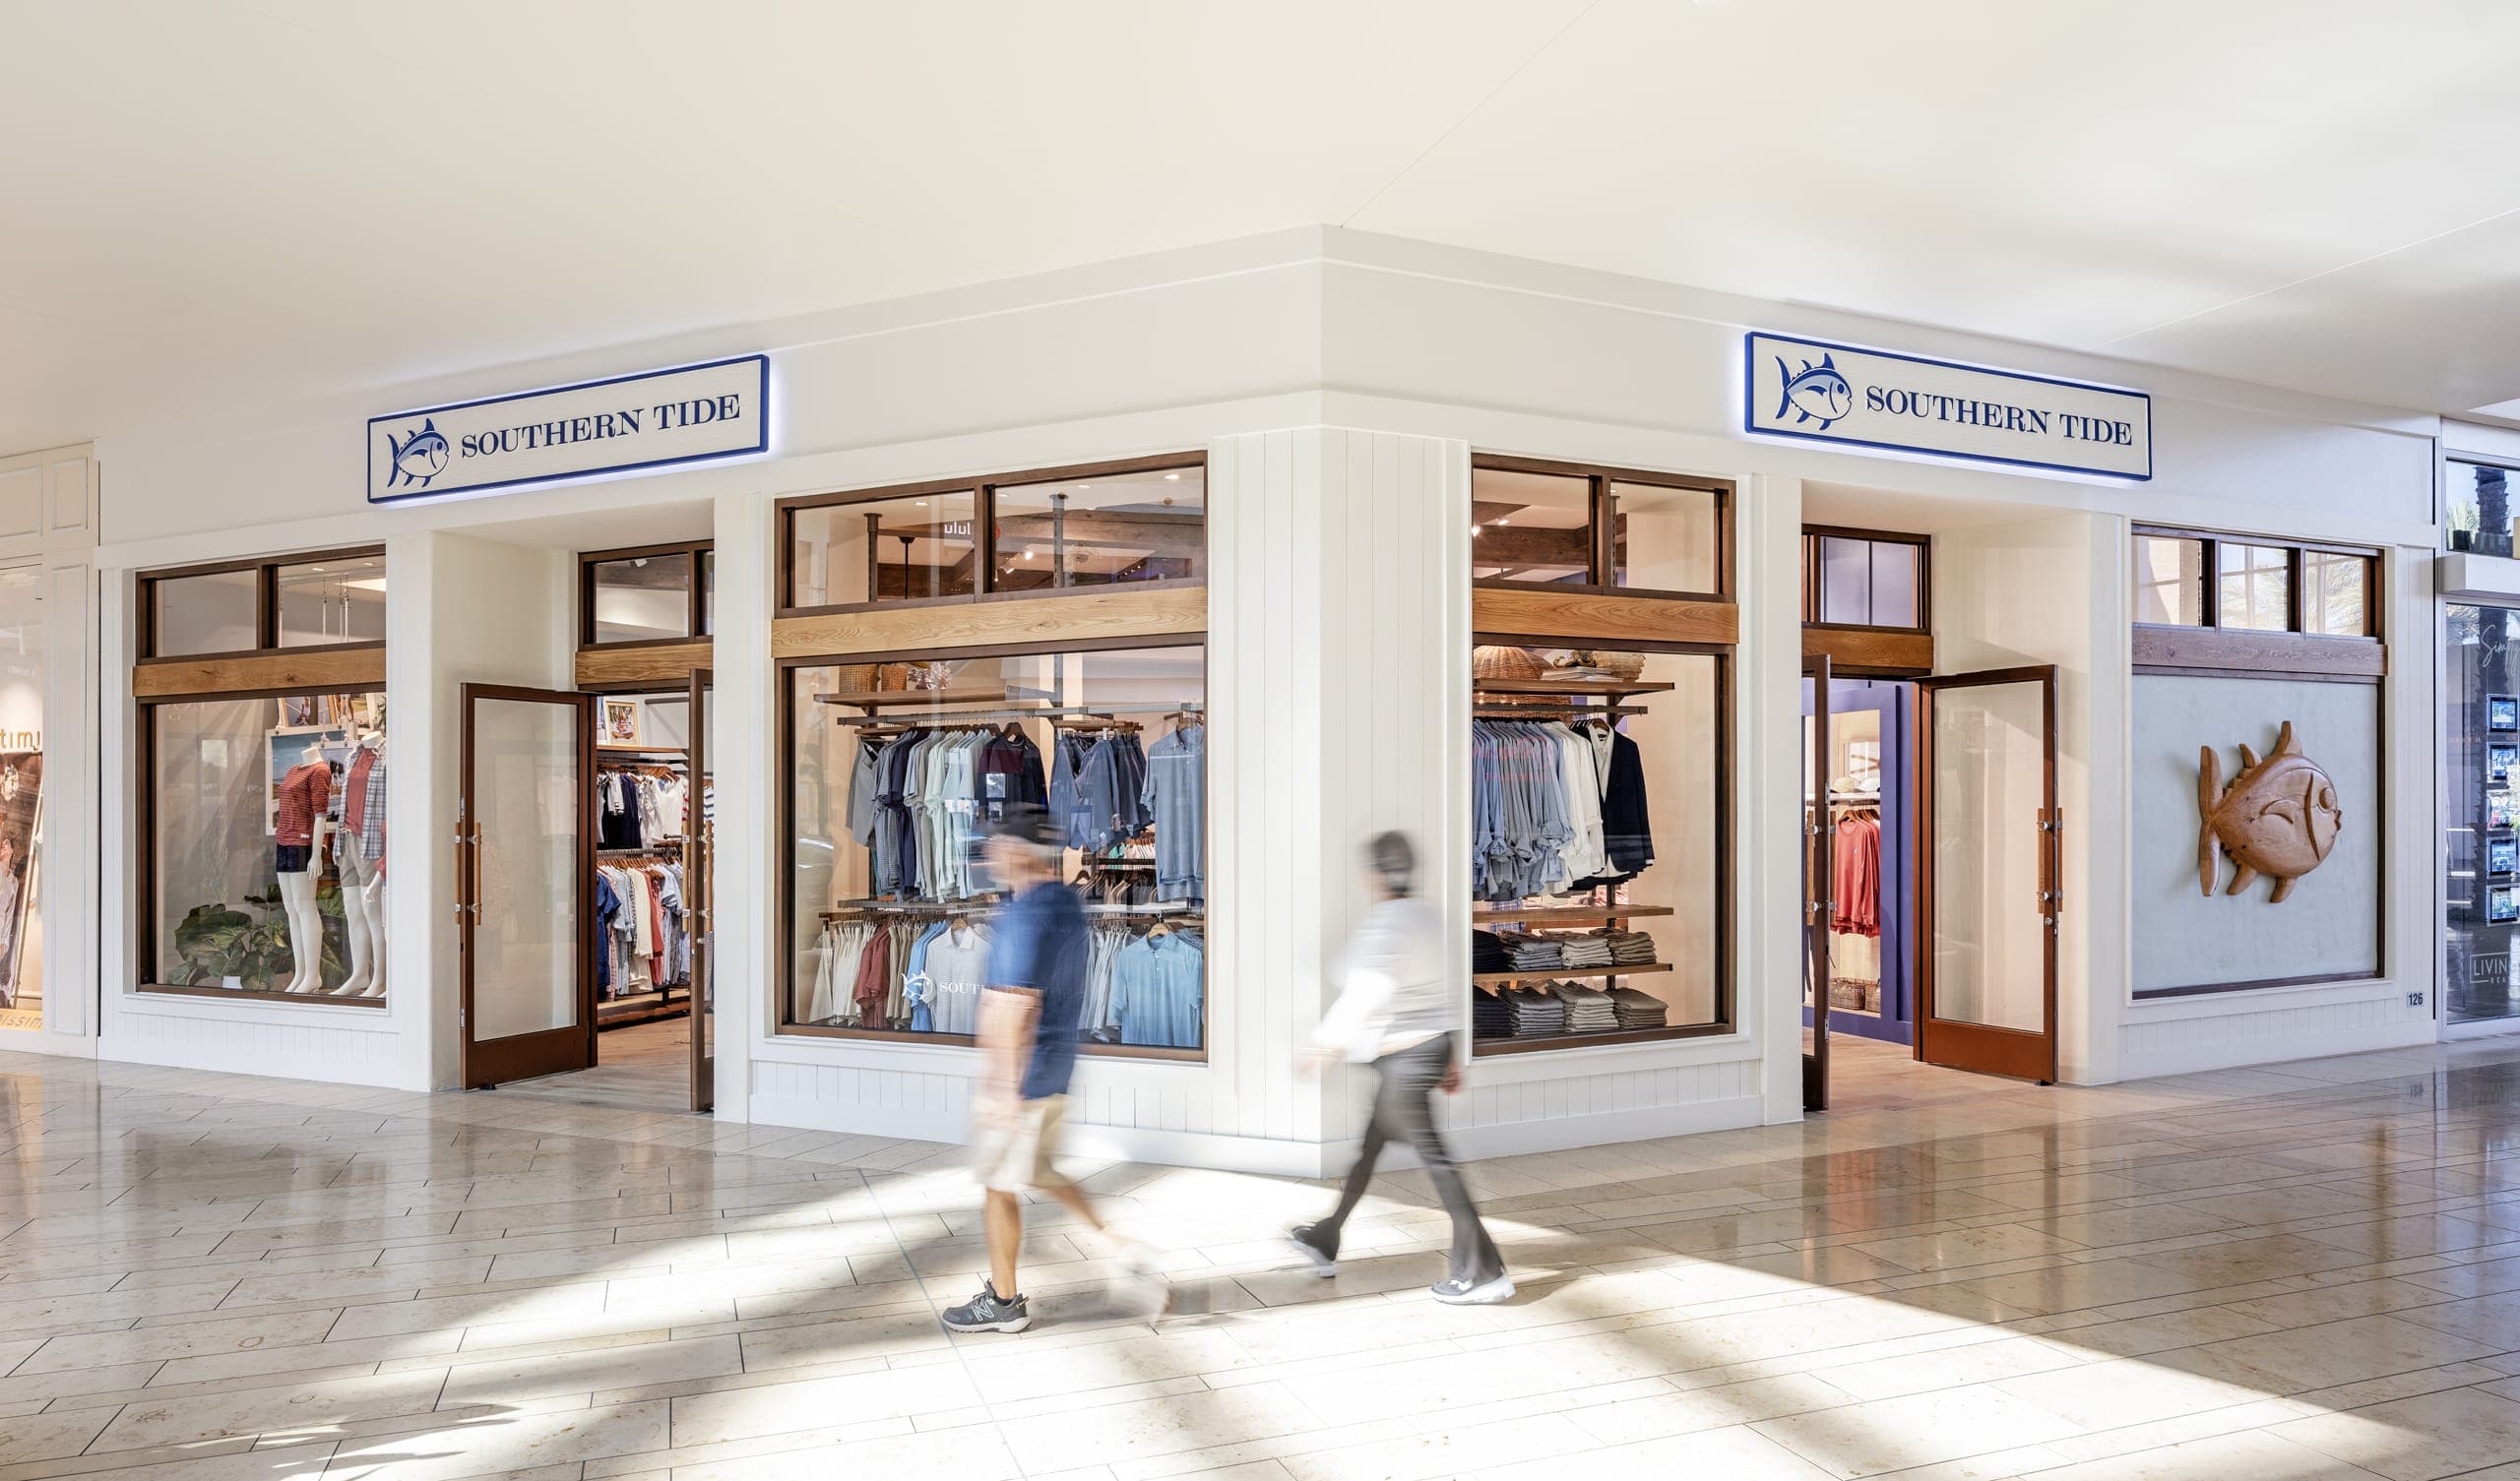 Southern Tide Store Front Exterior In Shopping Mall Utc Mall Two Pedestrians Walking Past